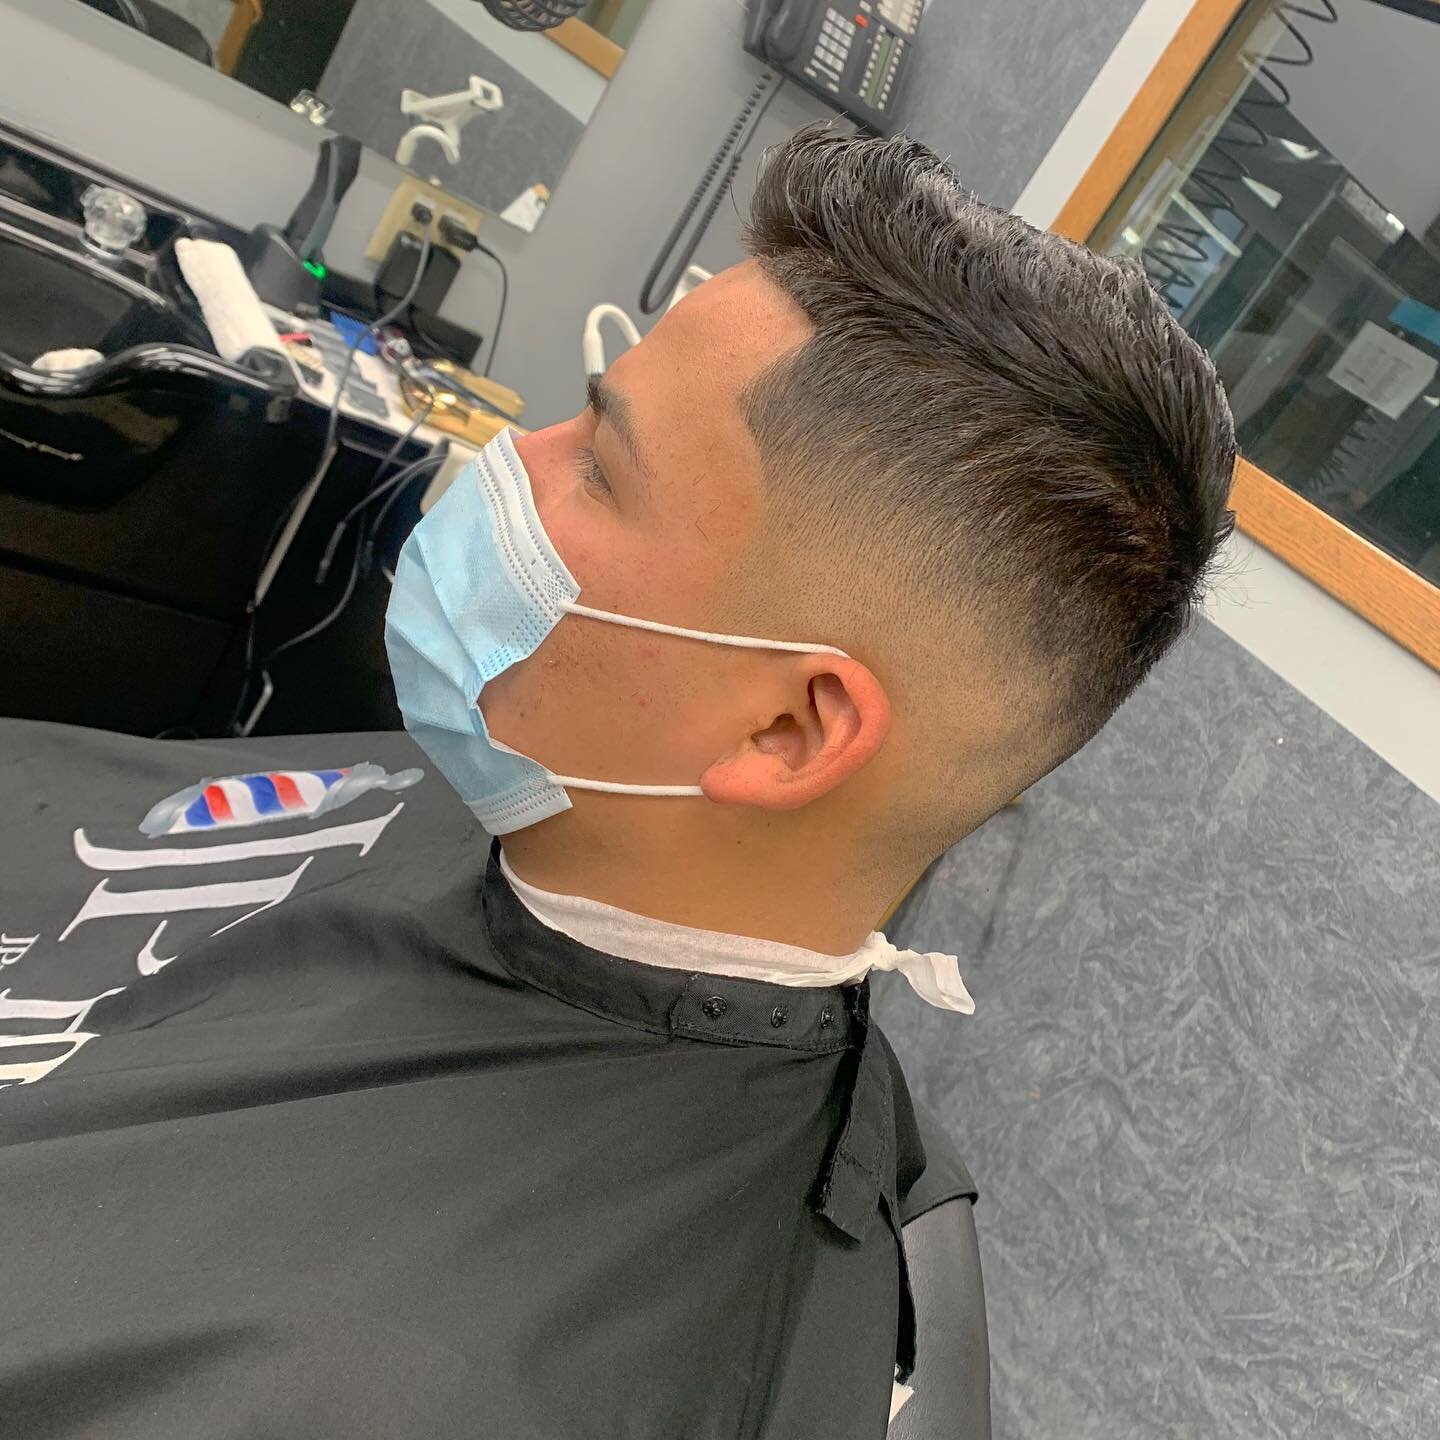 AFTER &mdash;-&gt; BEFORE . Do what you love, love what you do. #fadedrosesbarber #madisonbarber #madisonwi #jphairdesign #wahl #wahlpro #babyliss4barbers #femalebarber #fade #freshfade #babylisspro #wahl5star #elpatronpommade